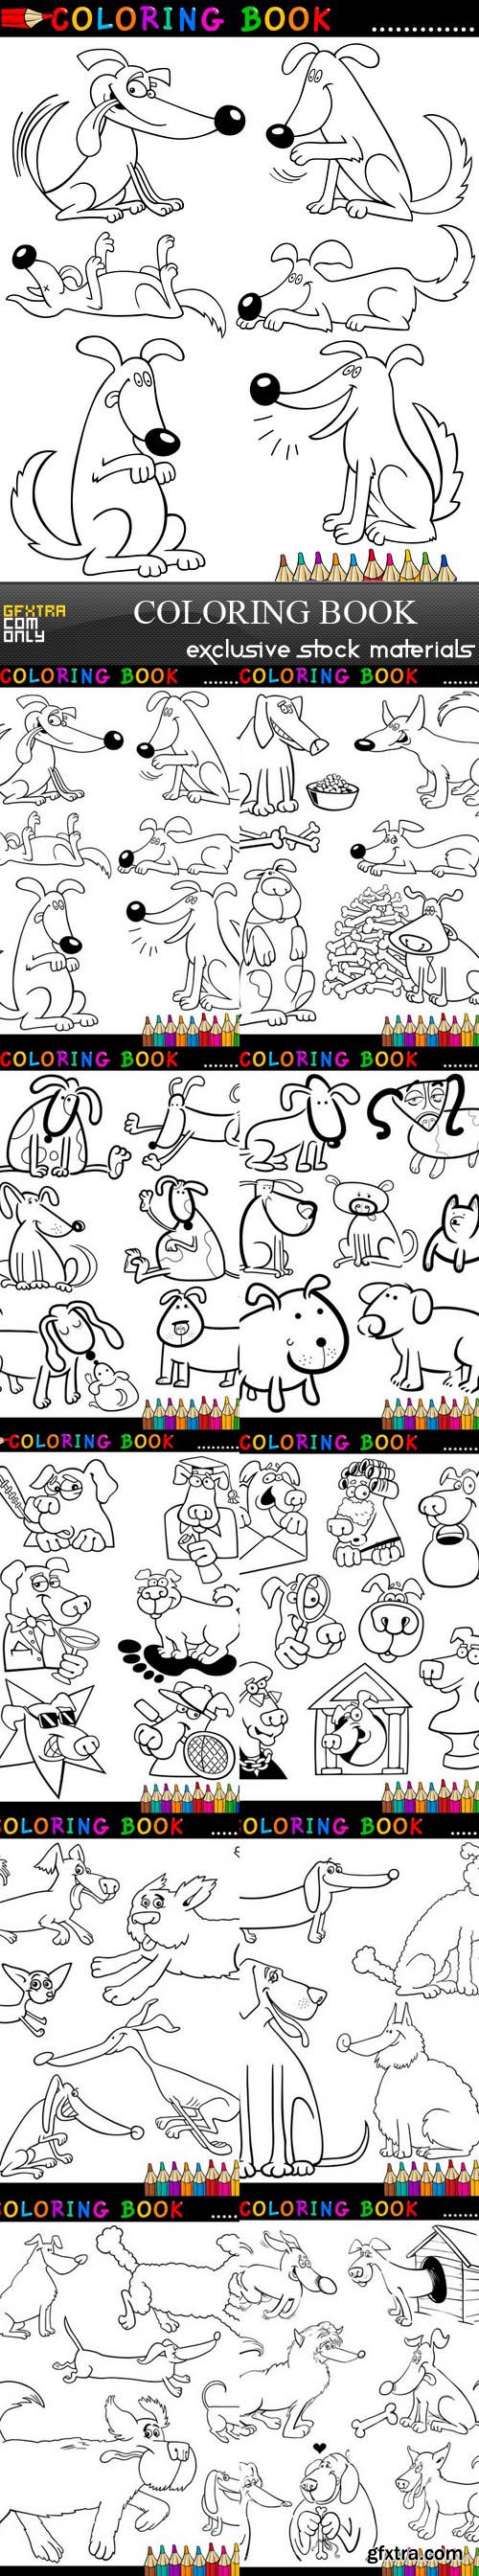 Funny Animal Coloring Book - 10xEPS